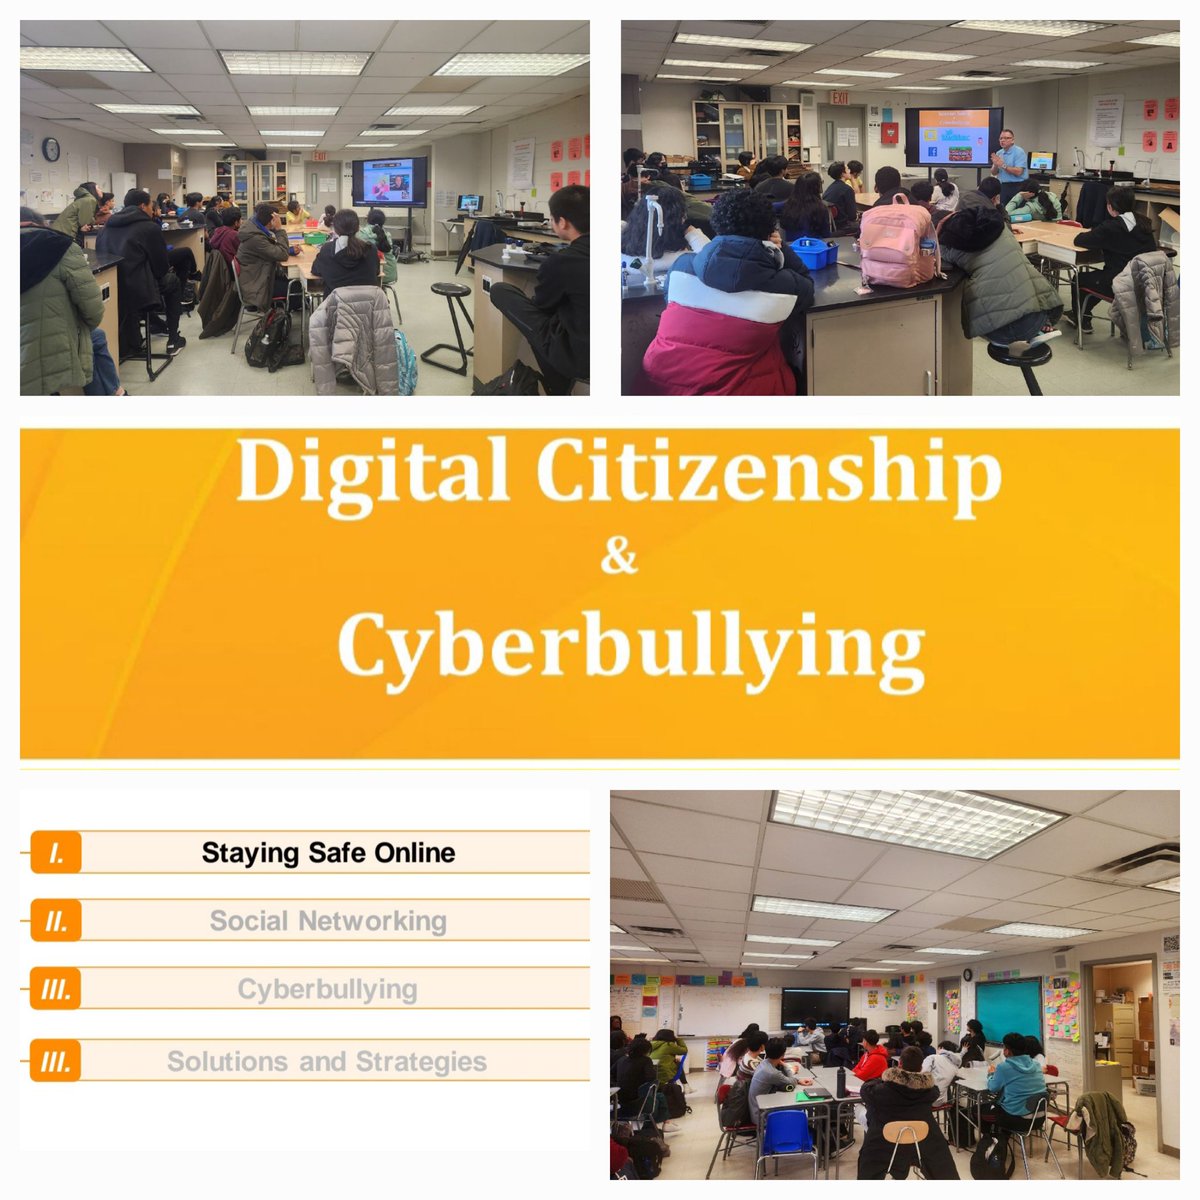 Another enriching day @QHSSYorkCollege diving into important conversations about #Cyberbullying and #DigitalCitizenship with the students. Remember, #ThinkBeforeYouClick and be mindful of your #DigitalFootprints and #HWcheckyourfollowers